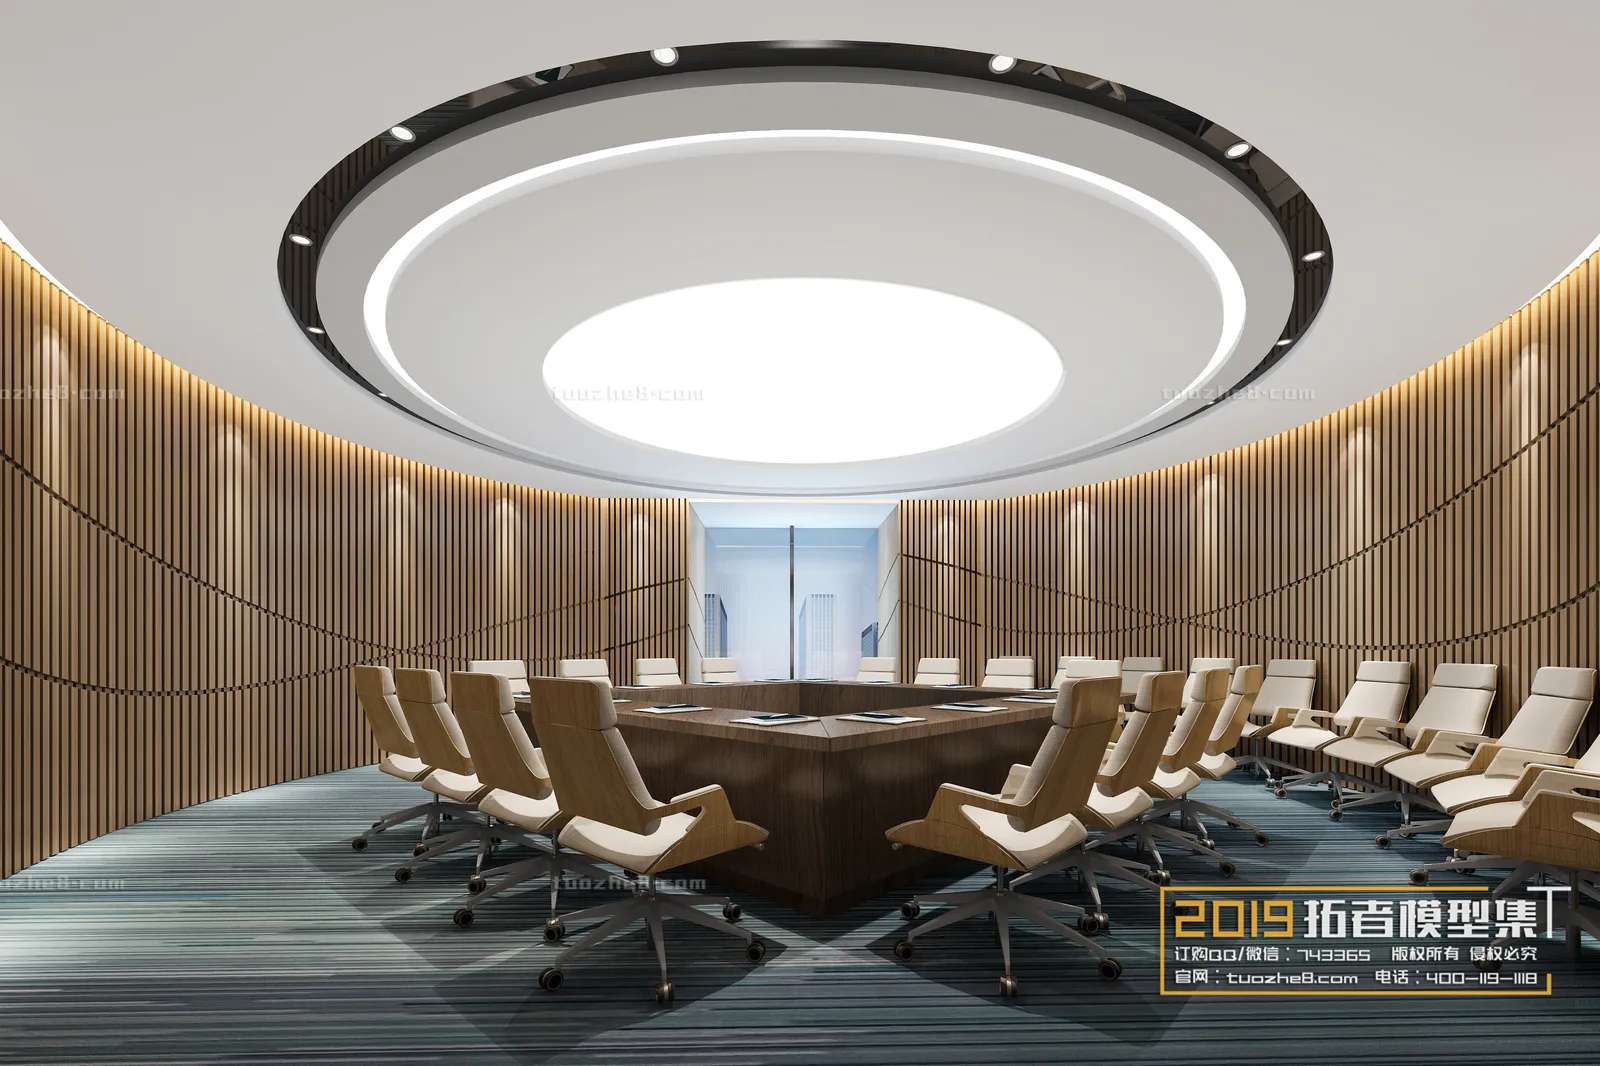 Extension Interior – MEETING  – LECTURE HALL – 003